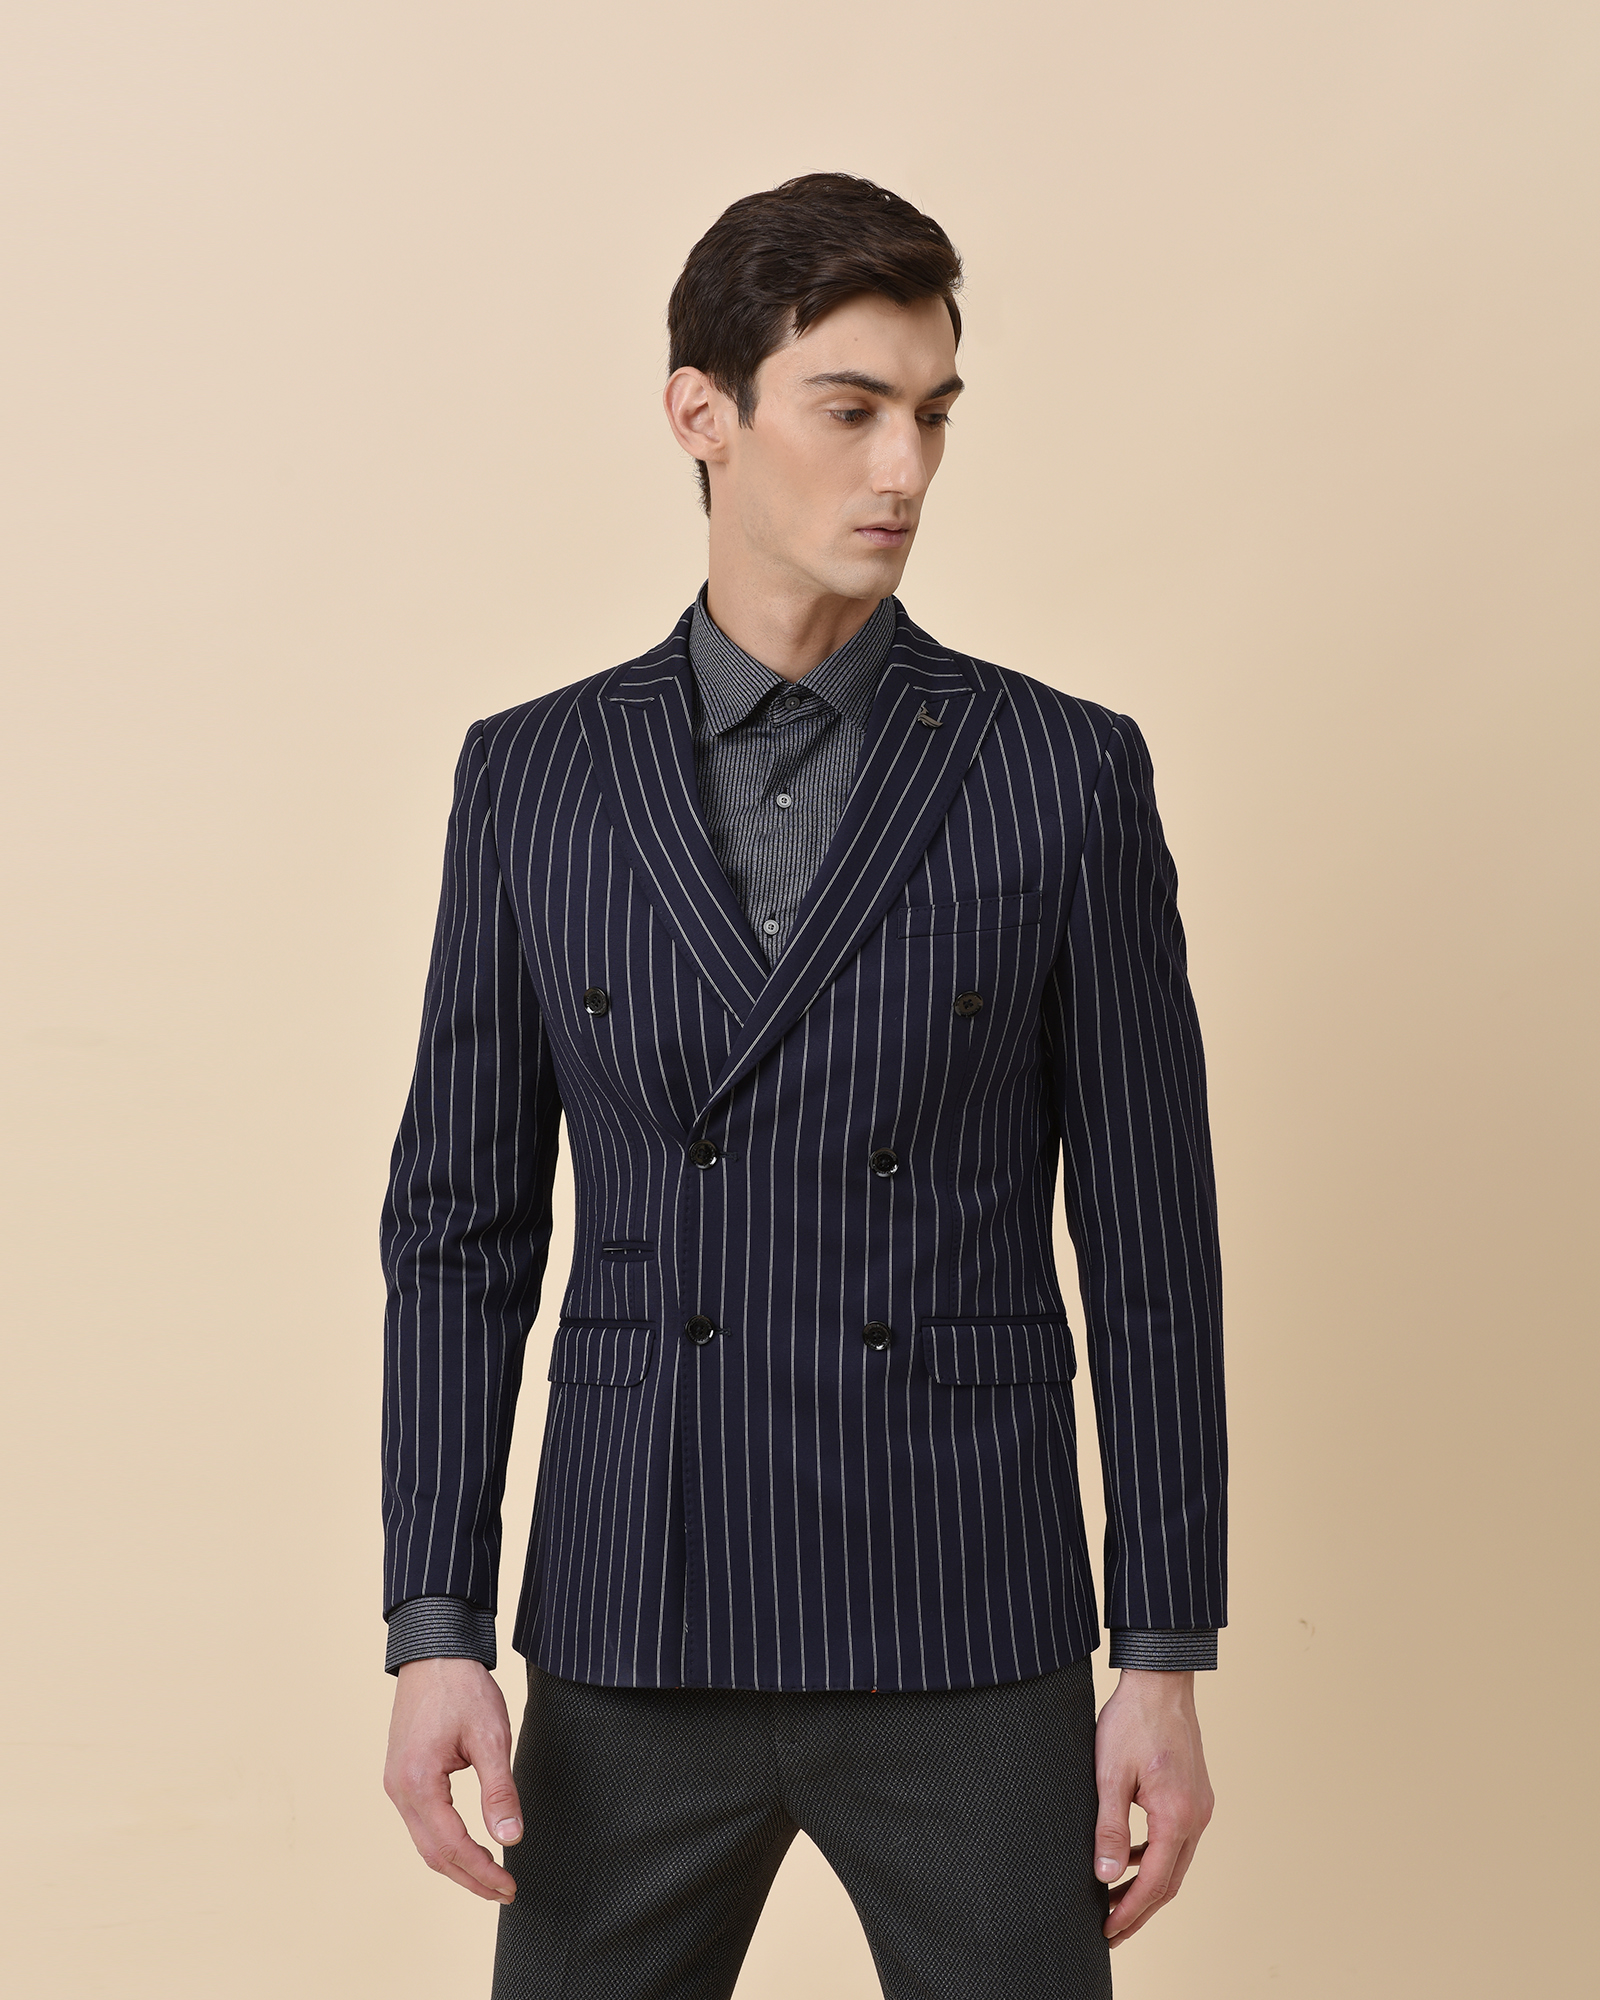 Double Breasted knit Slim Fit Jacket